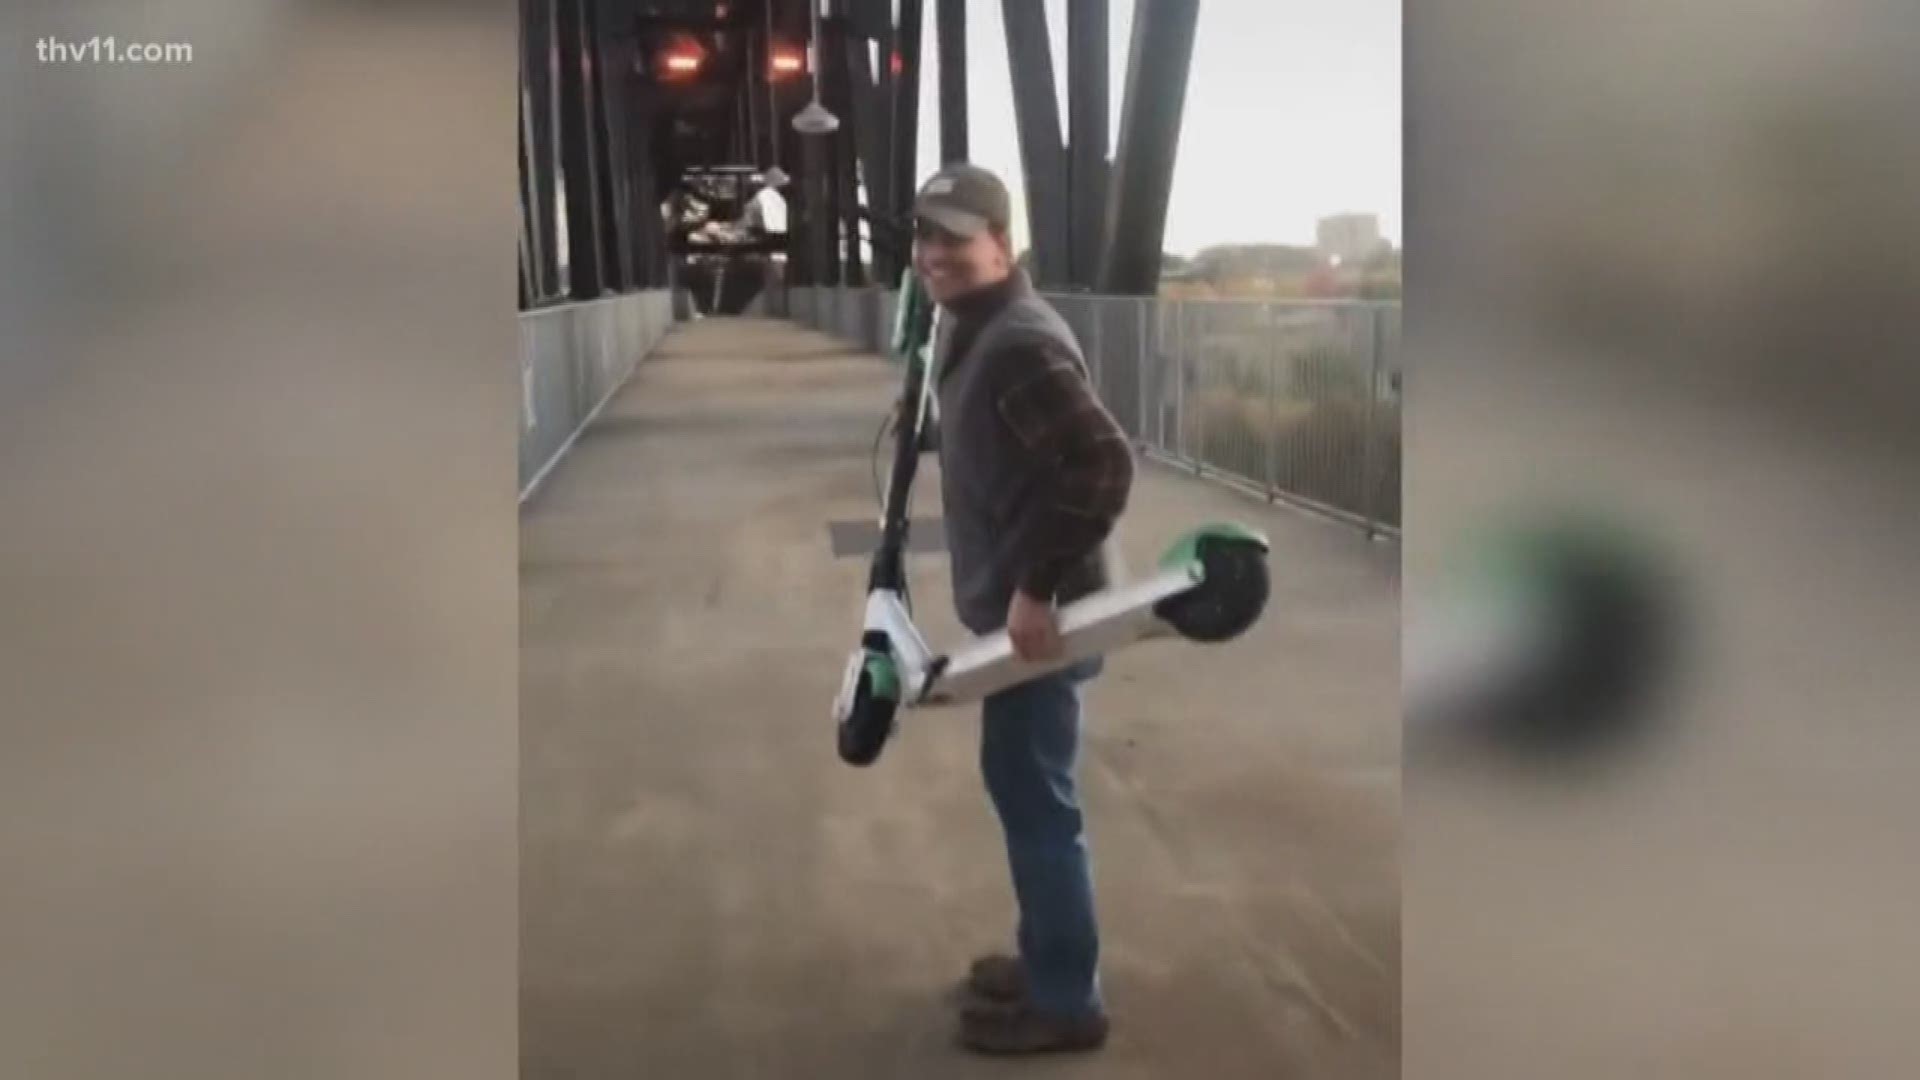 You may have seen a video on social media of a man throwing a Lime scooter off a bridge. It may have been a joke, but authorities did not find it funny.